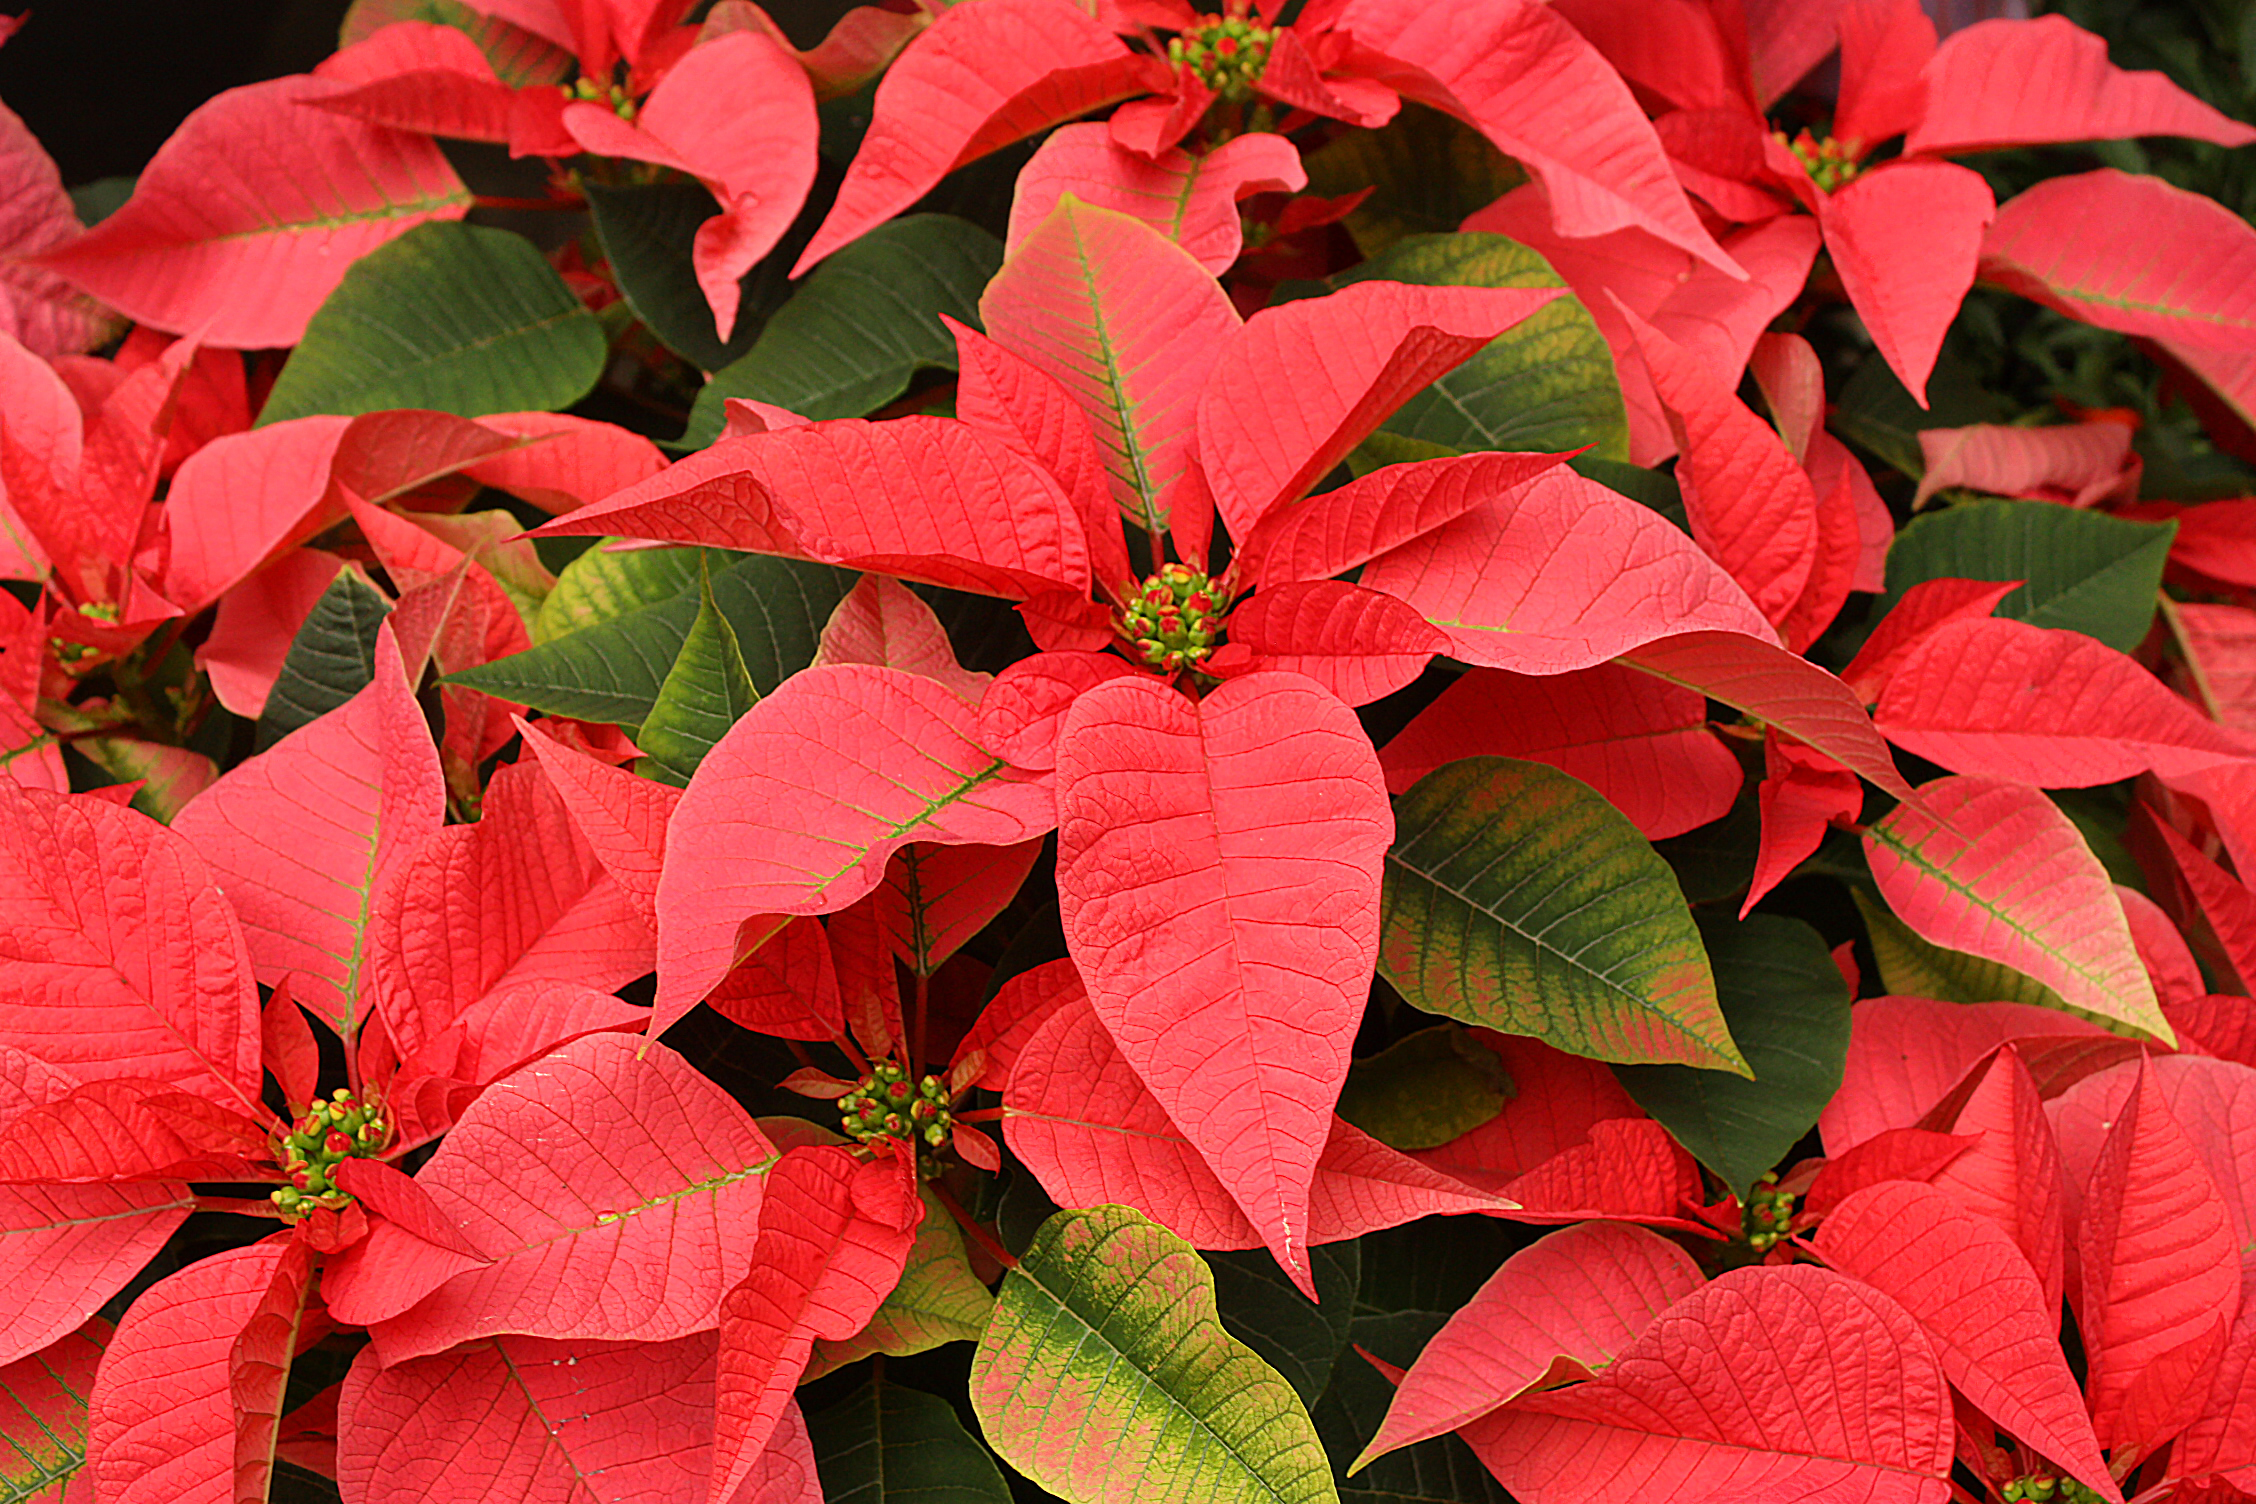 How to Care For a Poinsettia for the Holidays In Bedford